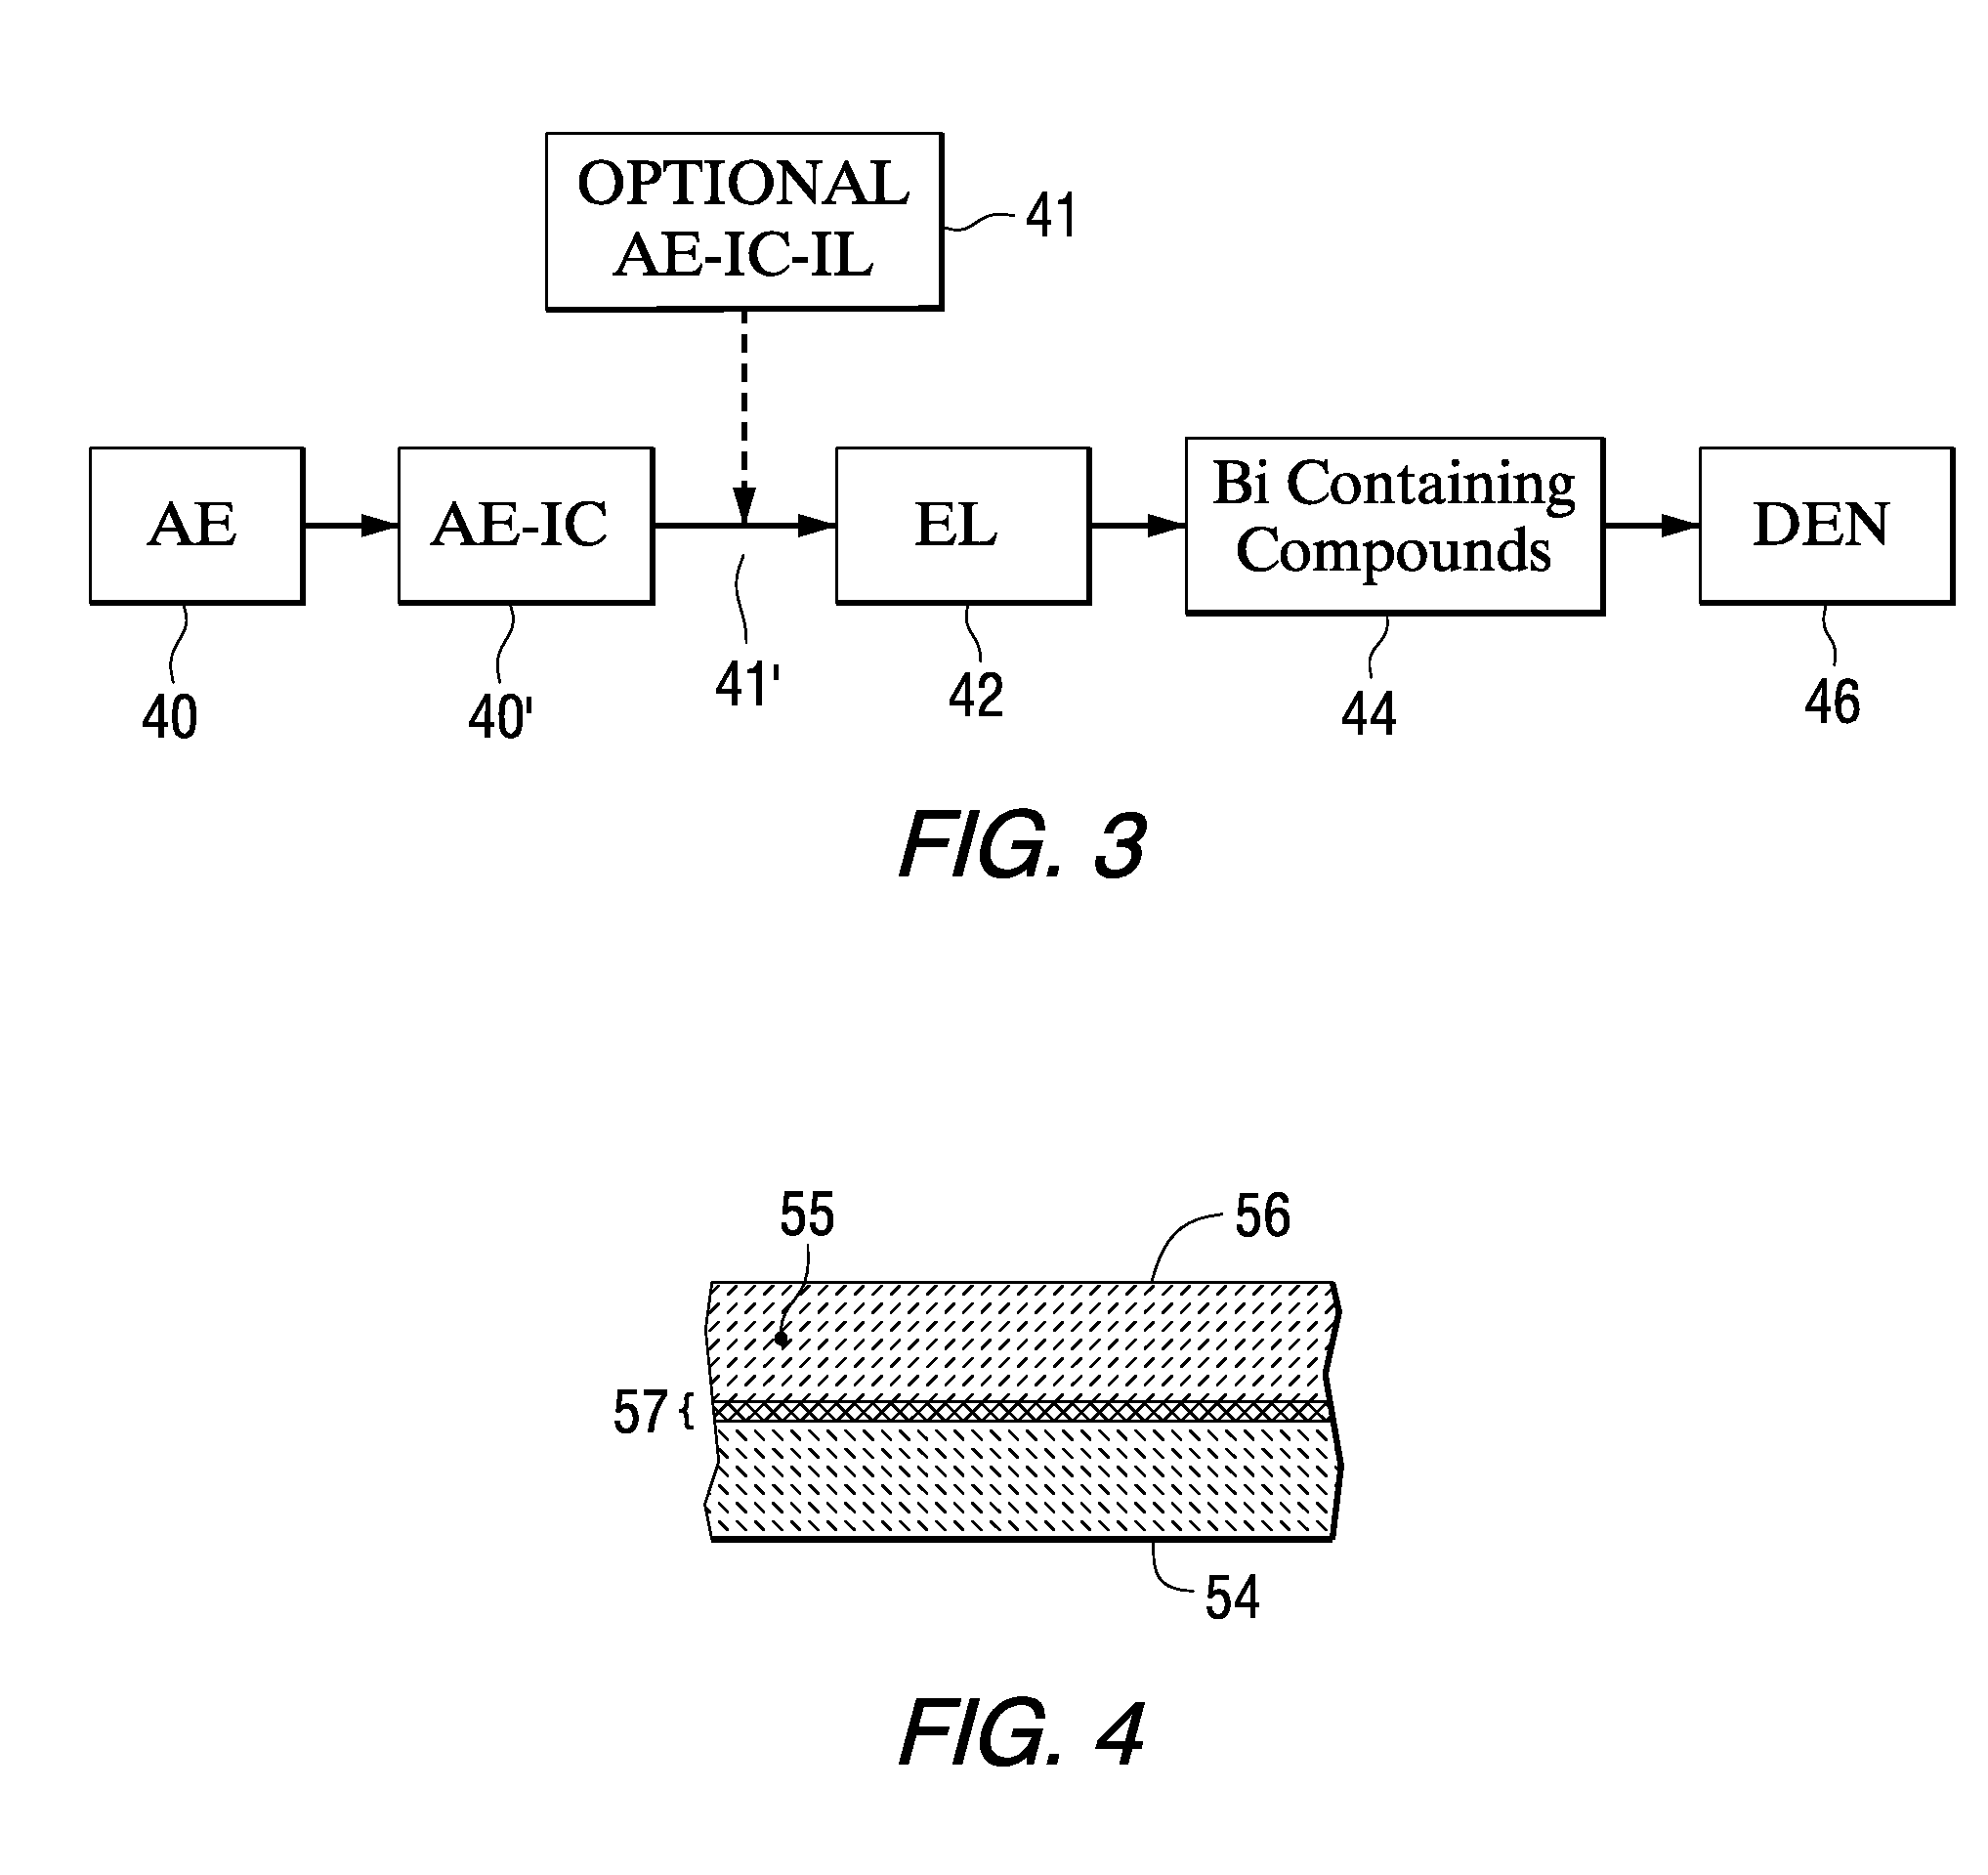 Bi Containing Solid Oxide Fuel Cell System With Improved Performance and Reduced Manufacturing Costs